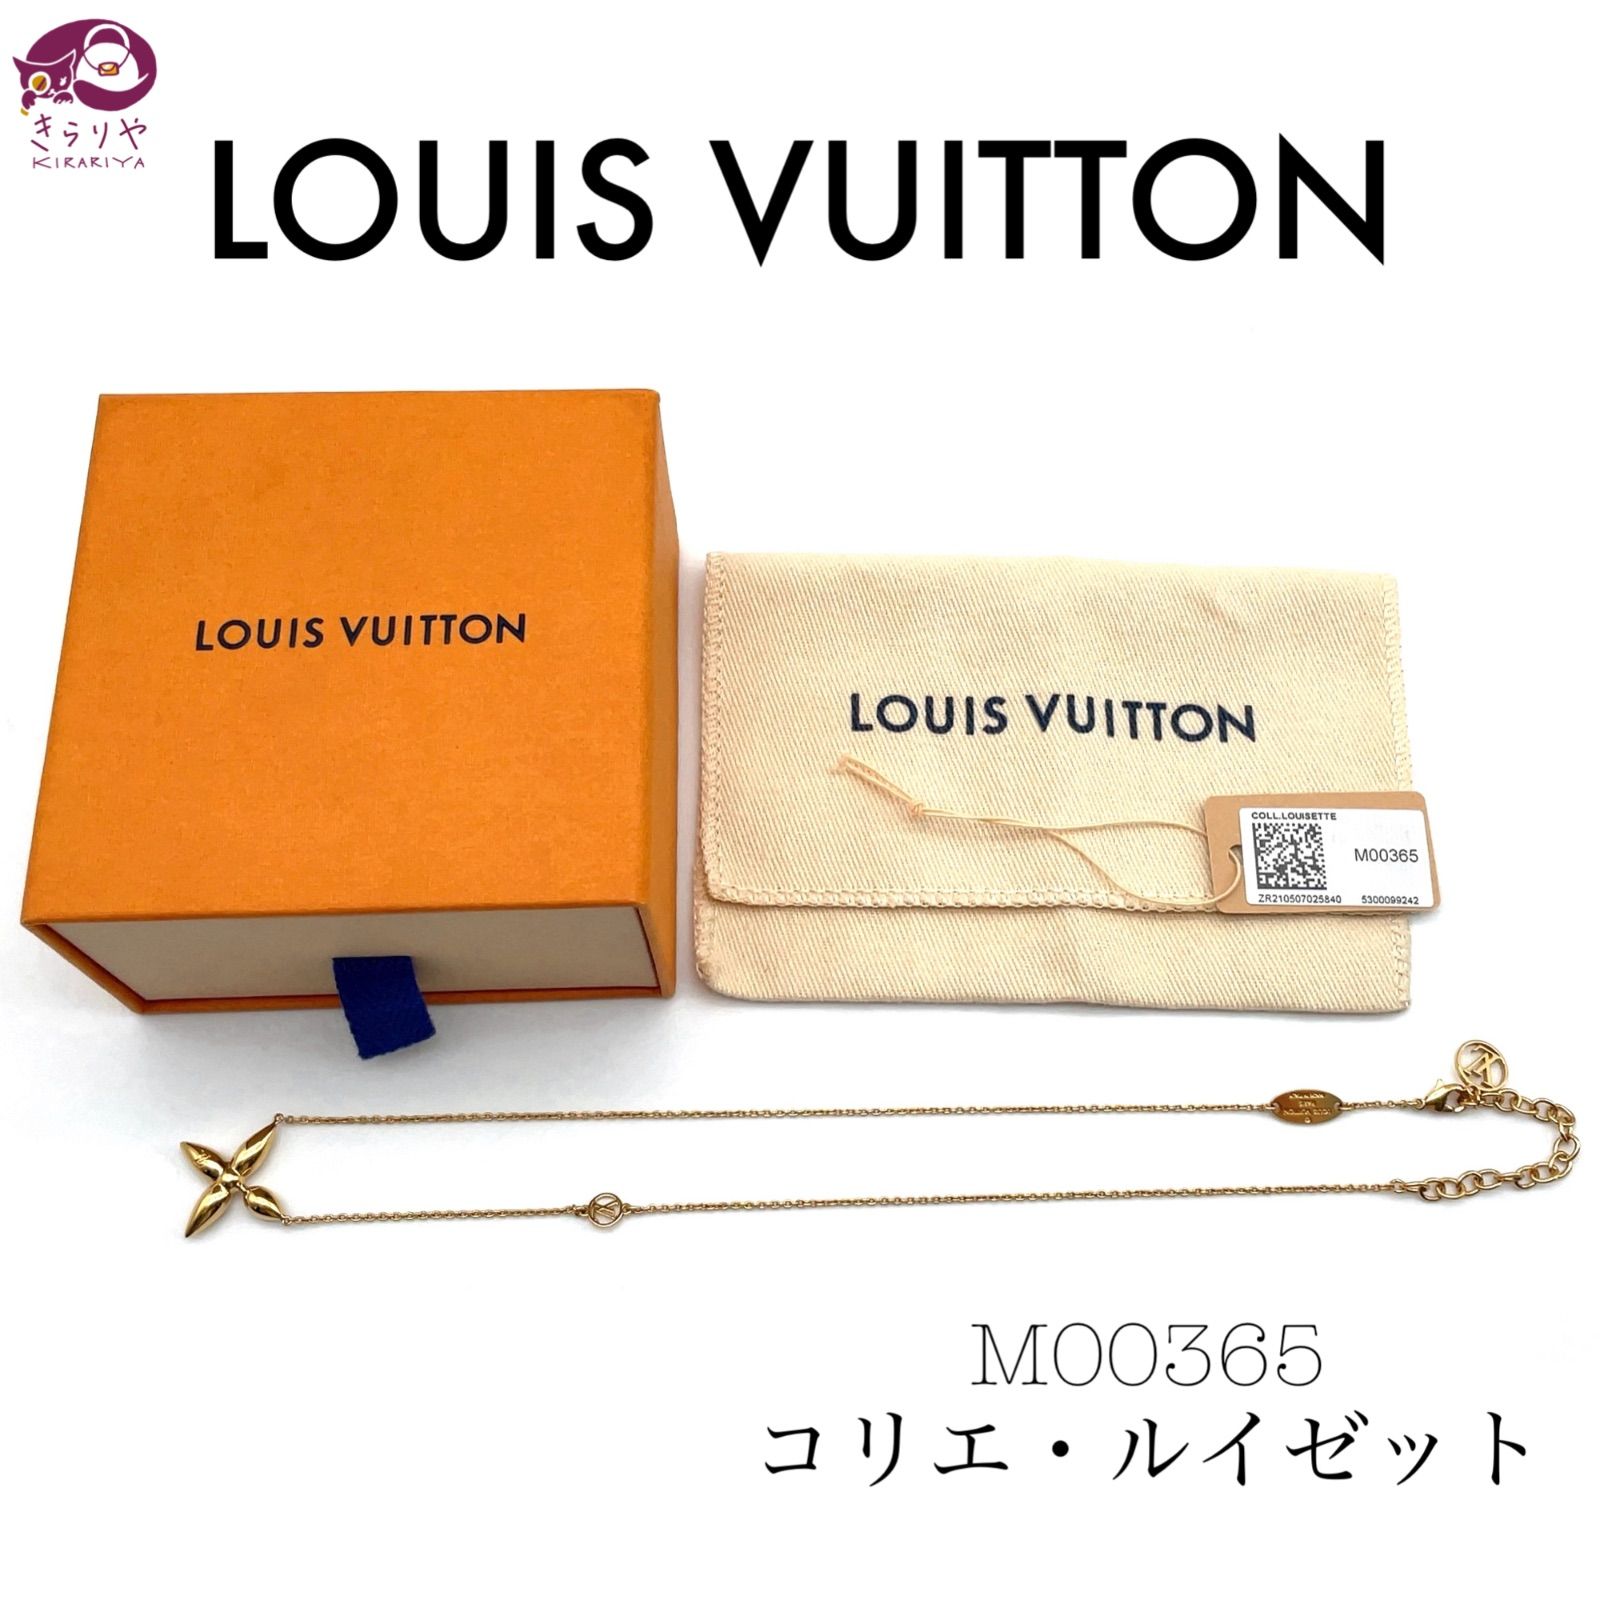 LOUIS VUITTON ルイヴィトン ネックレス M00365 コリエ・ルイゼット ...